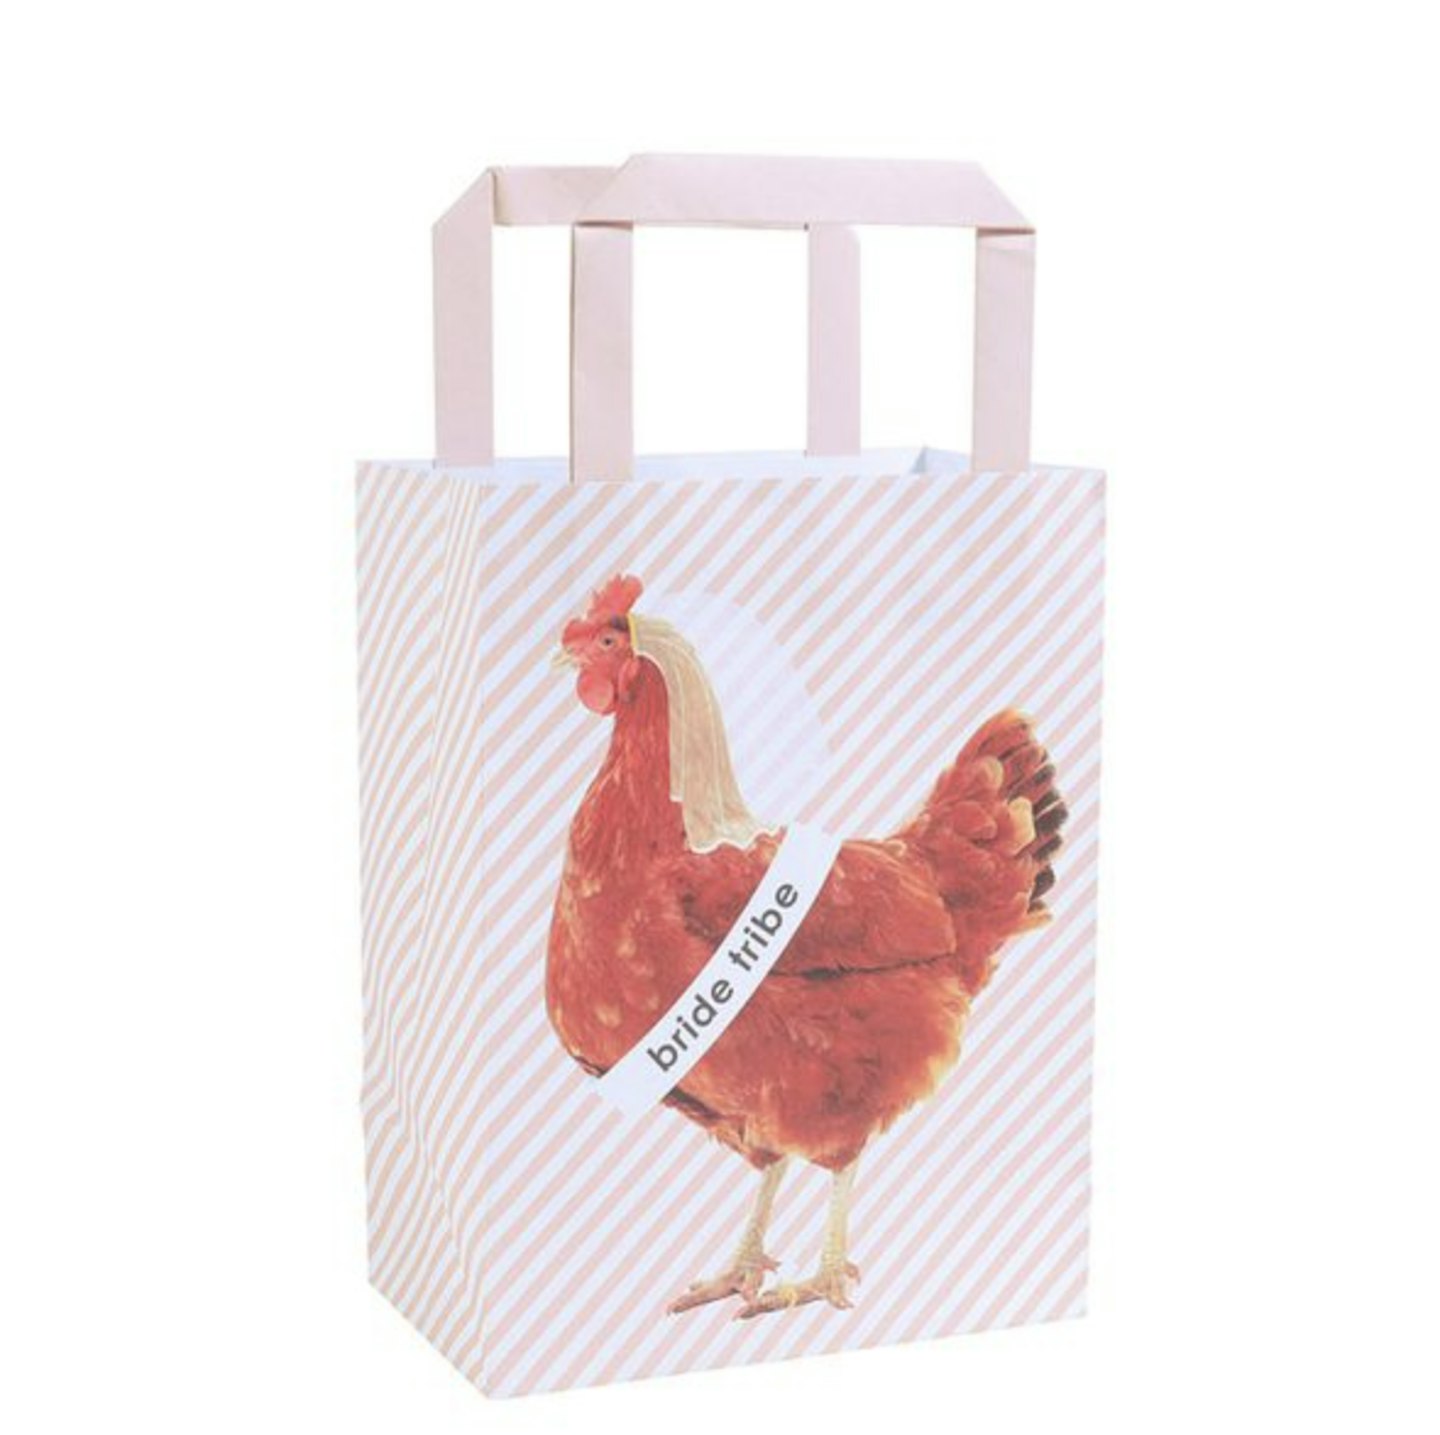 Hen party bags - pack of 5